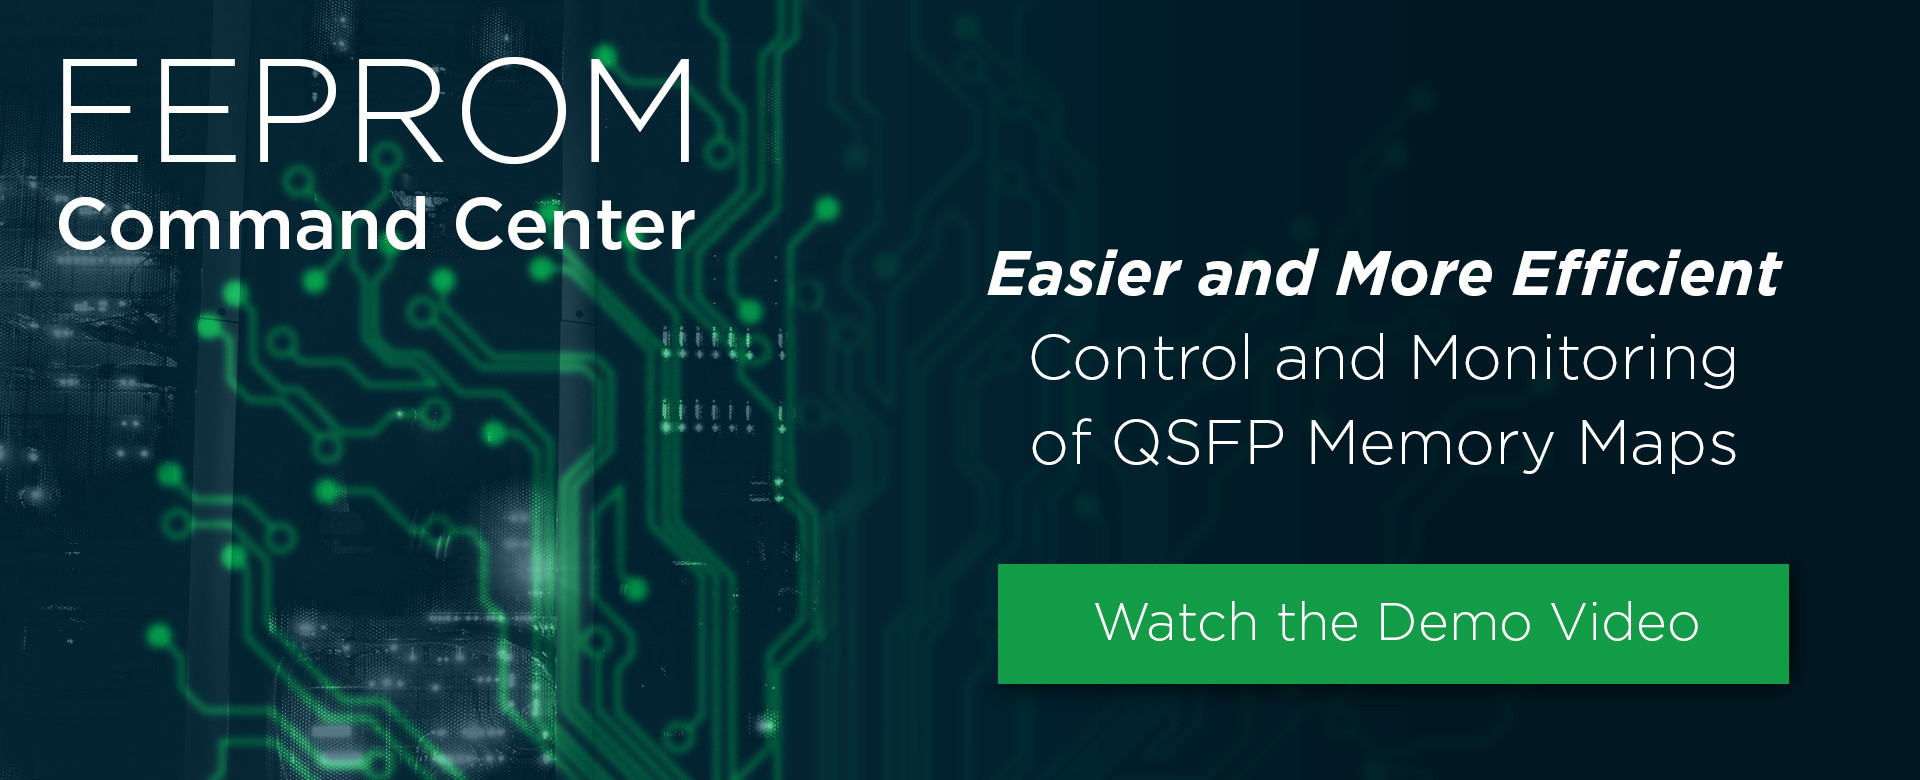 EEPROM Command Center monitors and controls QSFP memory maps